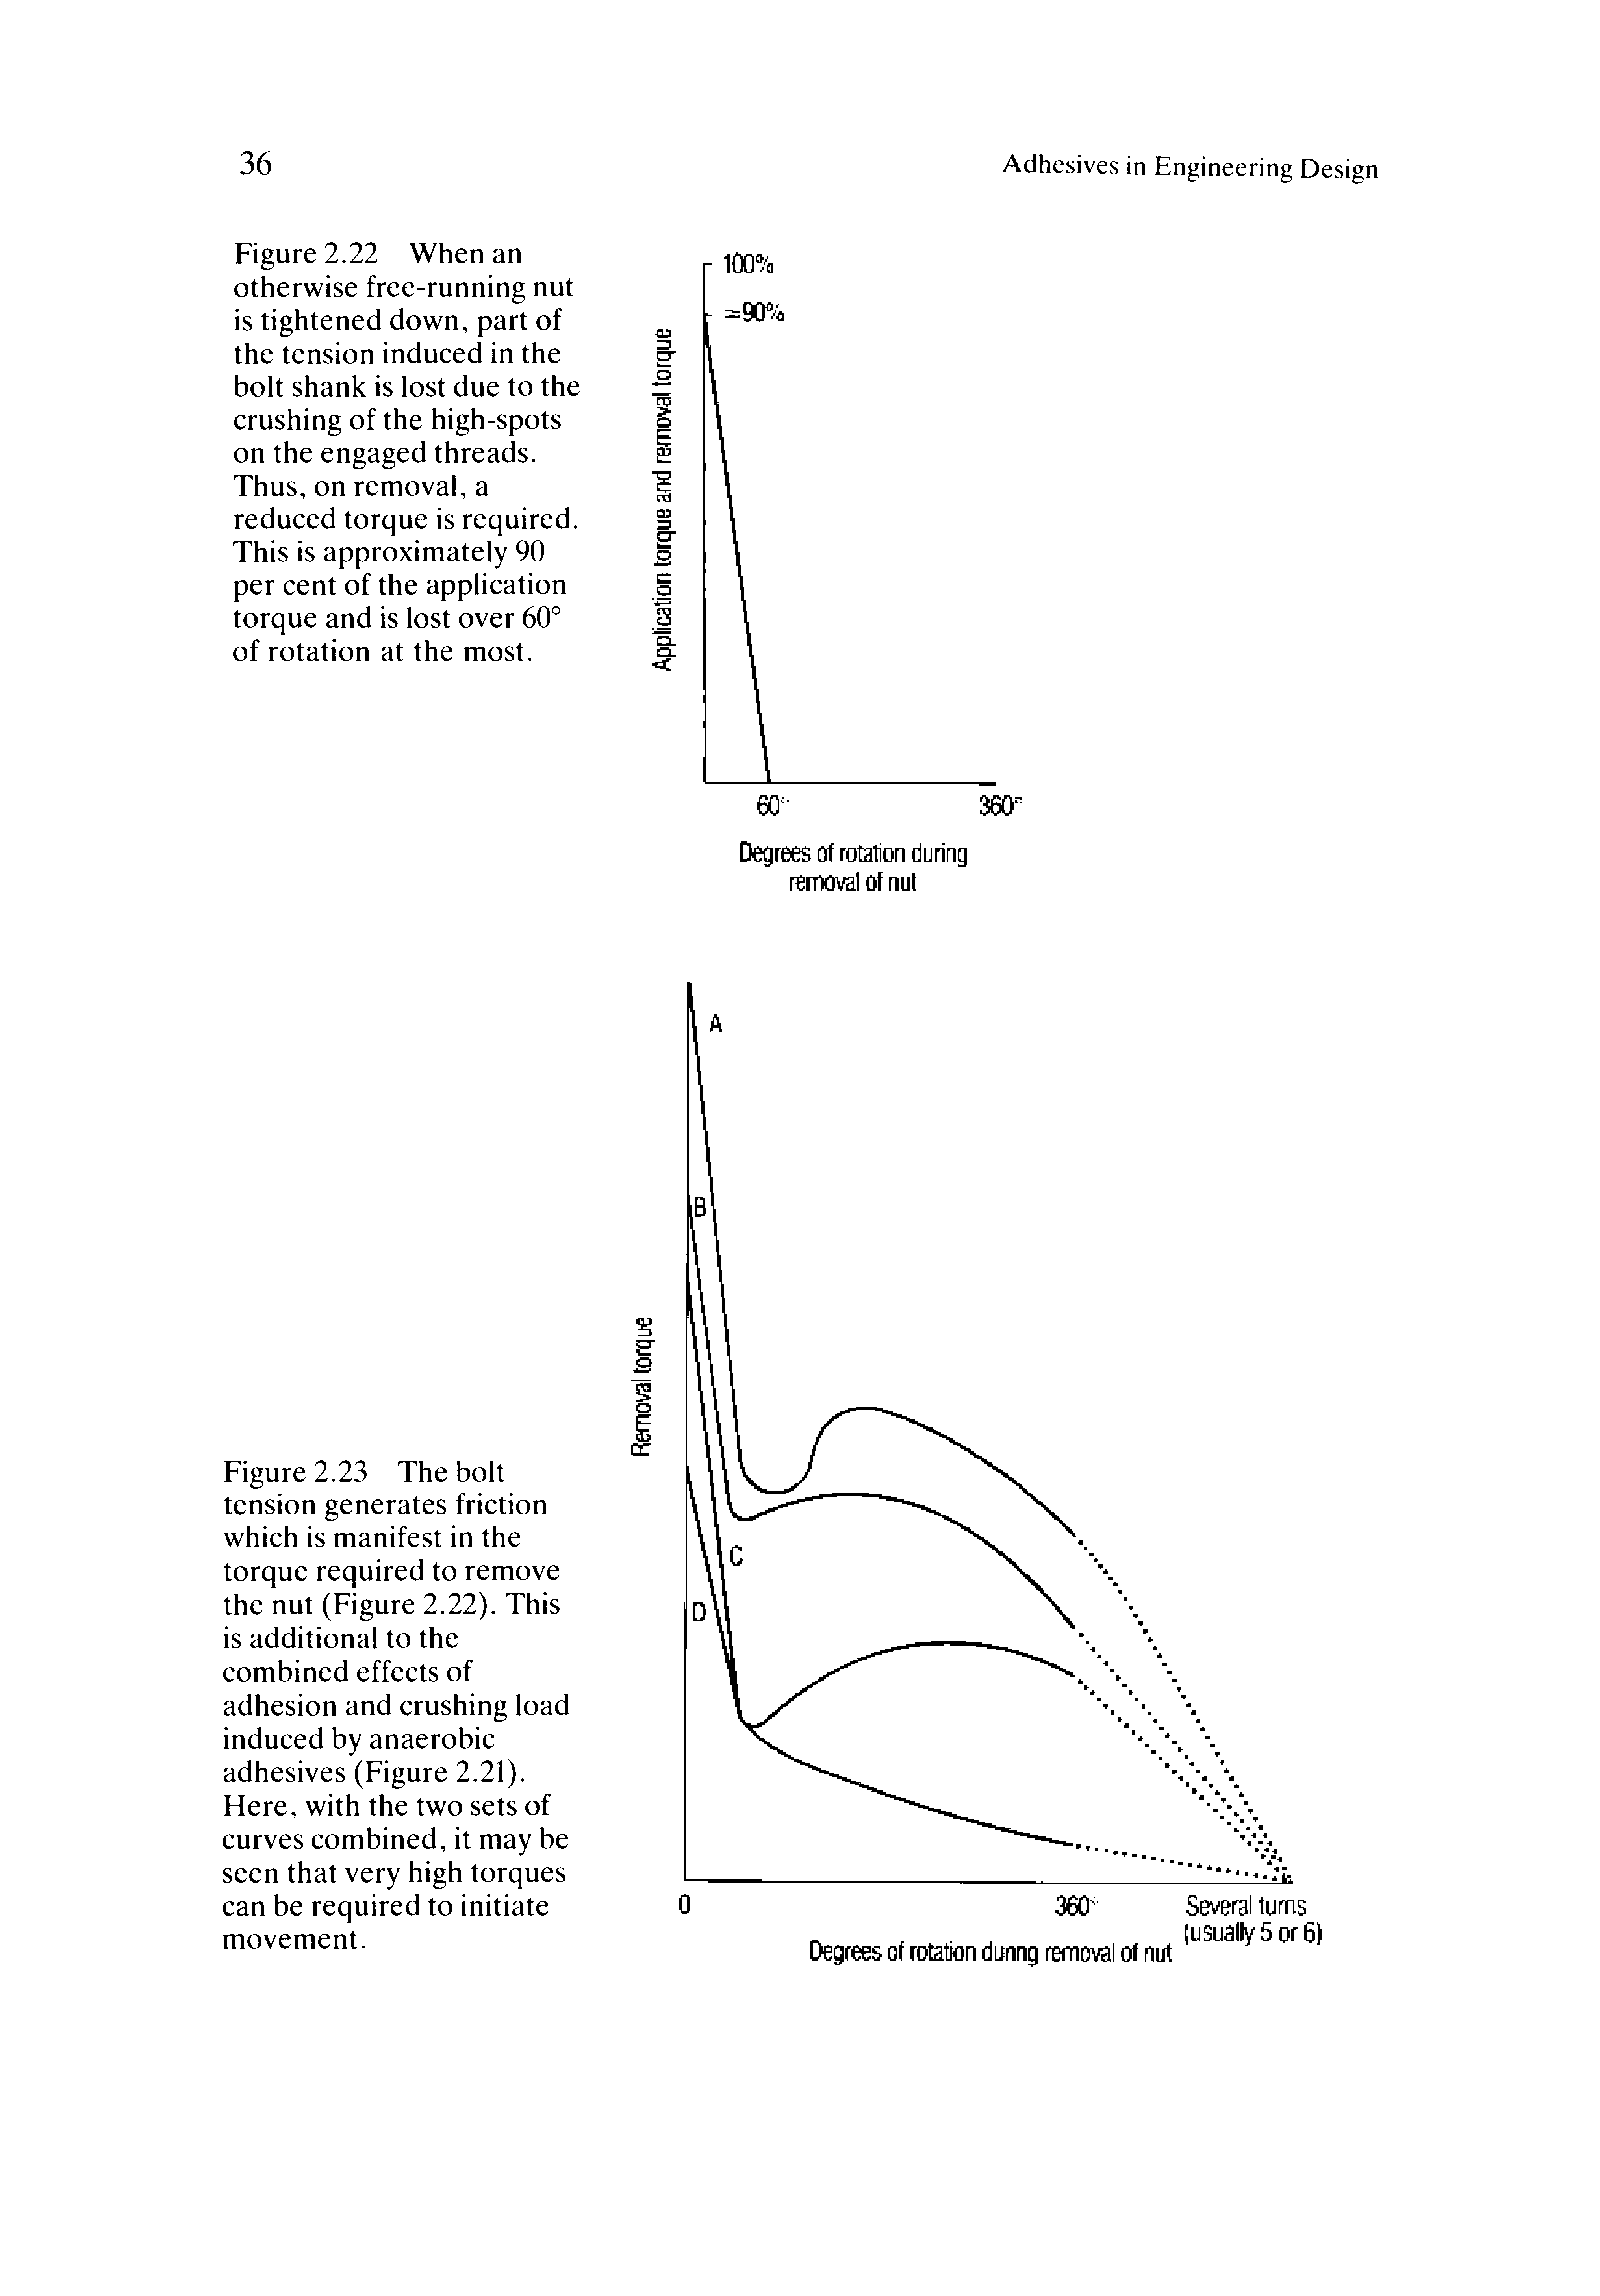 Figure 2.23 The bolt tension generates friction which is manifest in the torque required to remove the nut (Figure 2.22). This is additional to the combined effects of adhesion and crushing load induced by anaerobic adhesives (Figure 2.21). Here, with the two sets of curves combined, it may be seen that very high torques can be required to initiate movement.